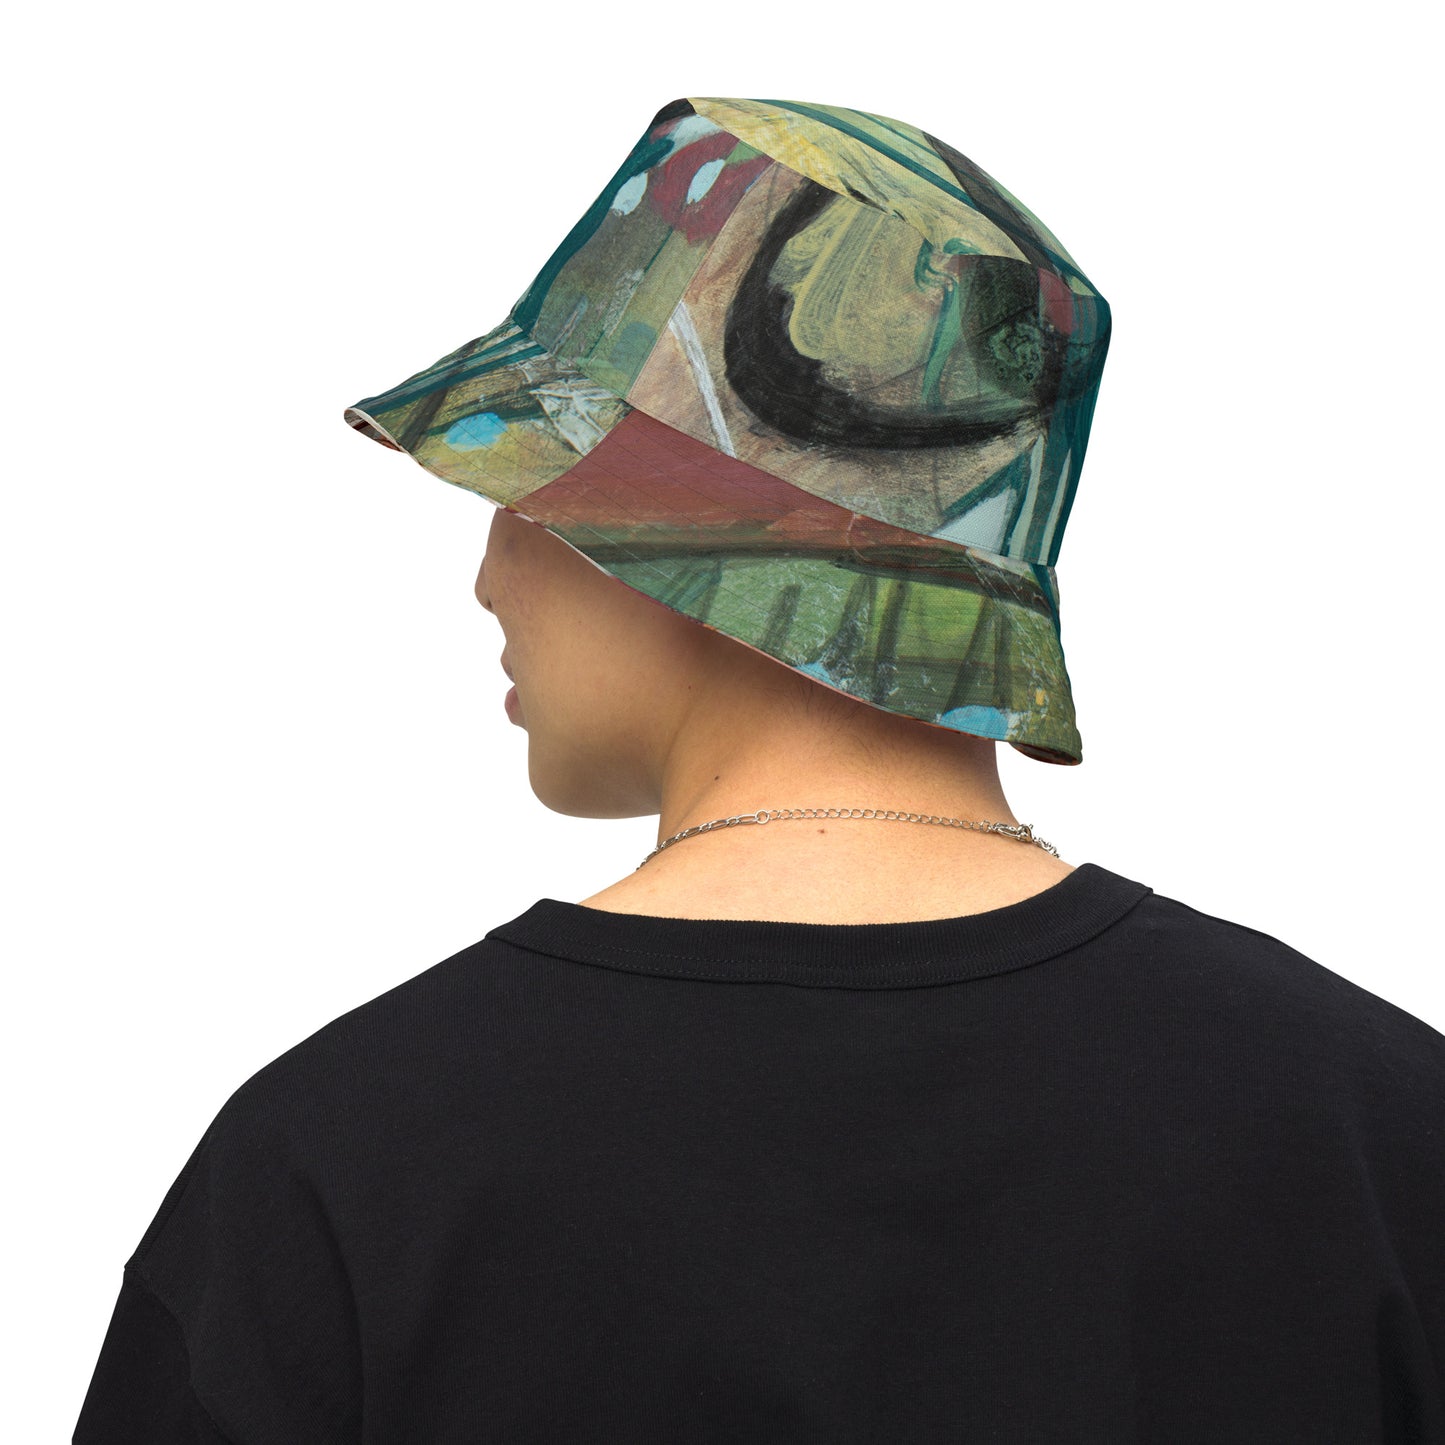 Twisted / Stop the Battle Reversible bucket hat